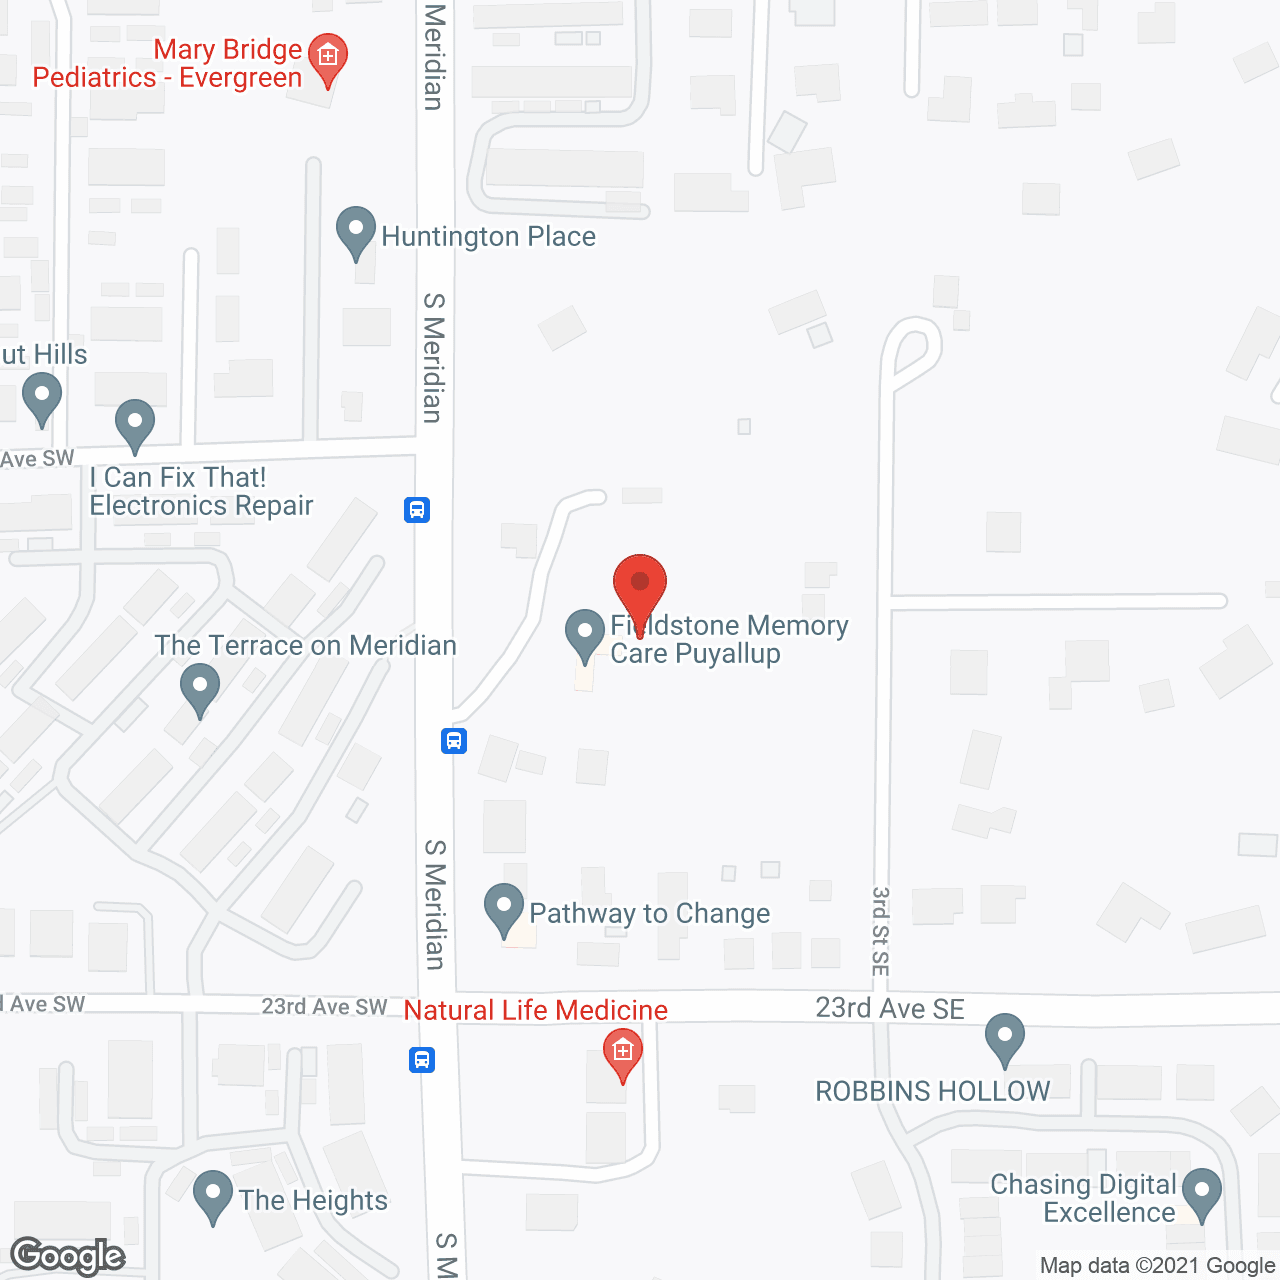 Fieldstone Memory Care Puyallup in google map